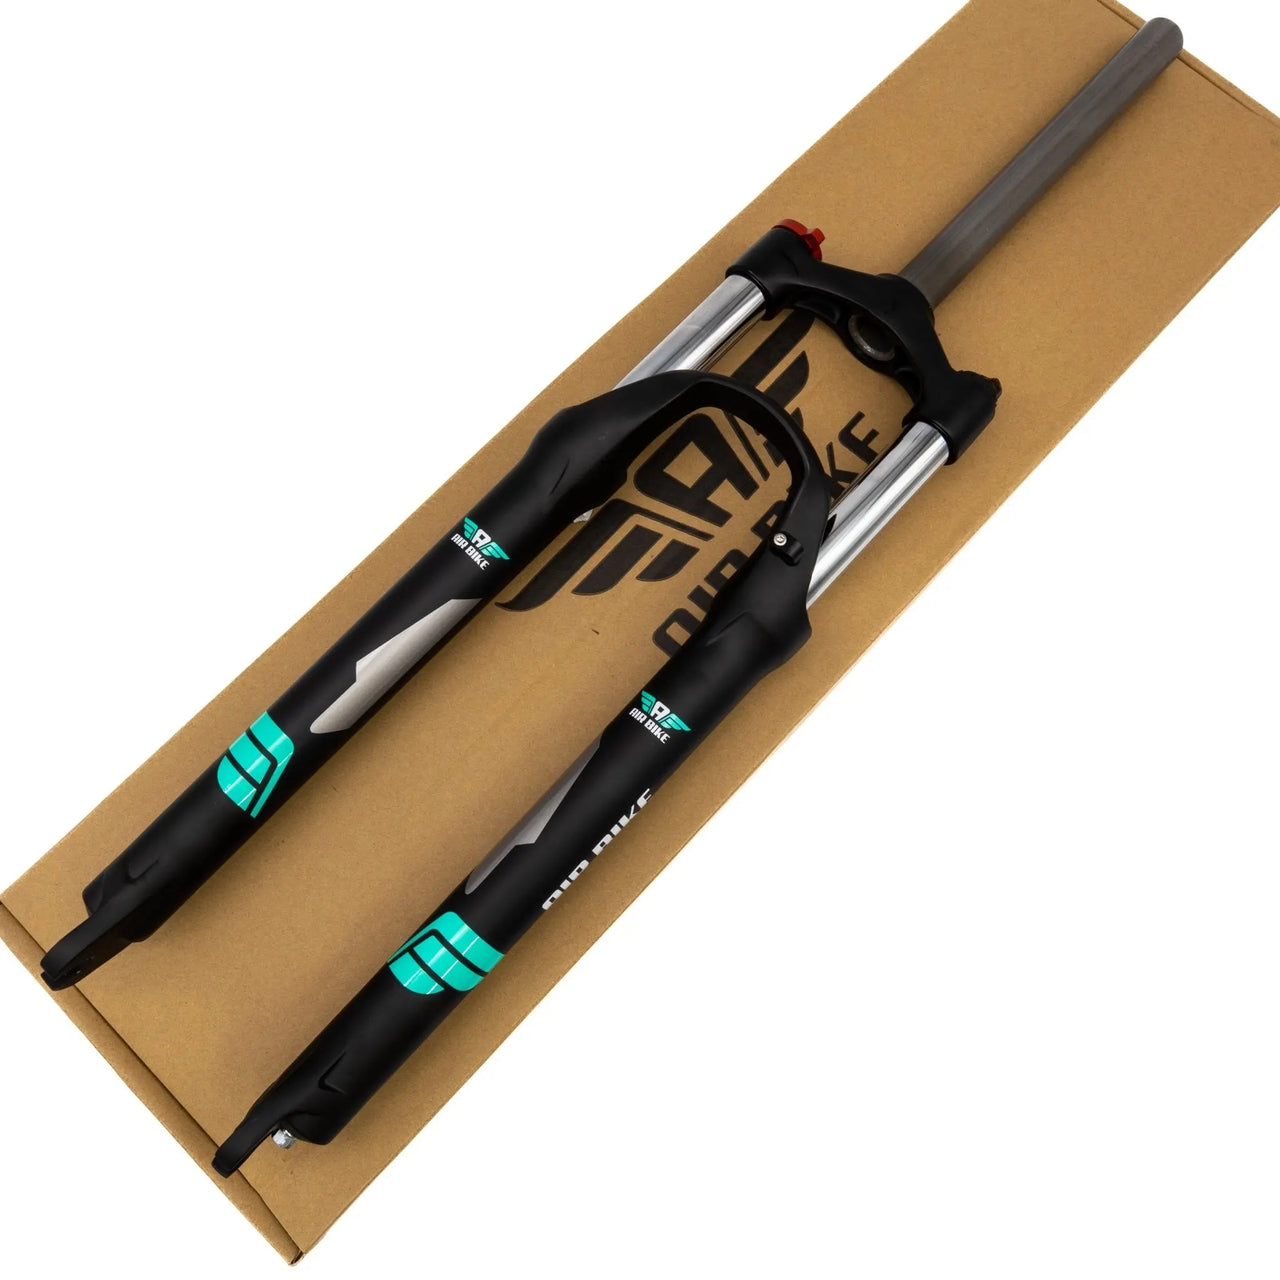 Unboxing of the 27.5-inch mountain bike suspension forks, packaged in cardboard